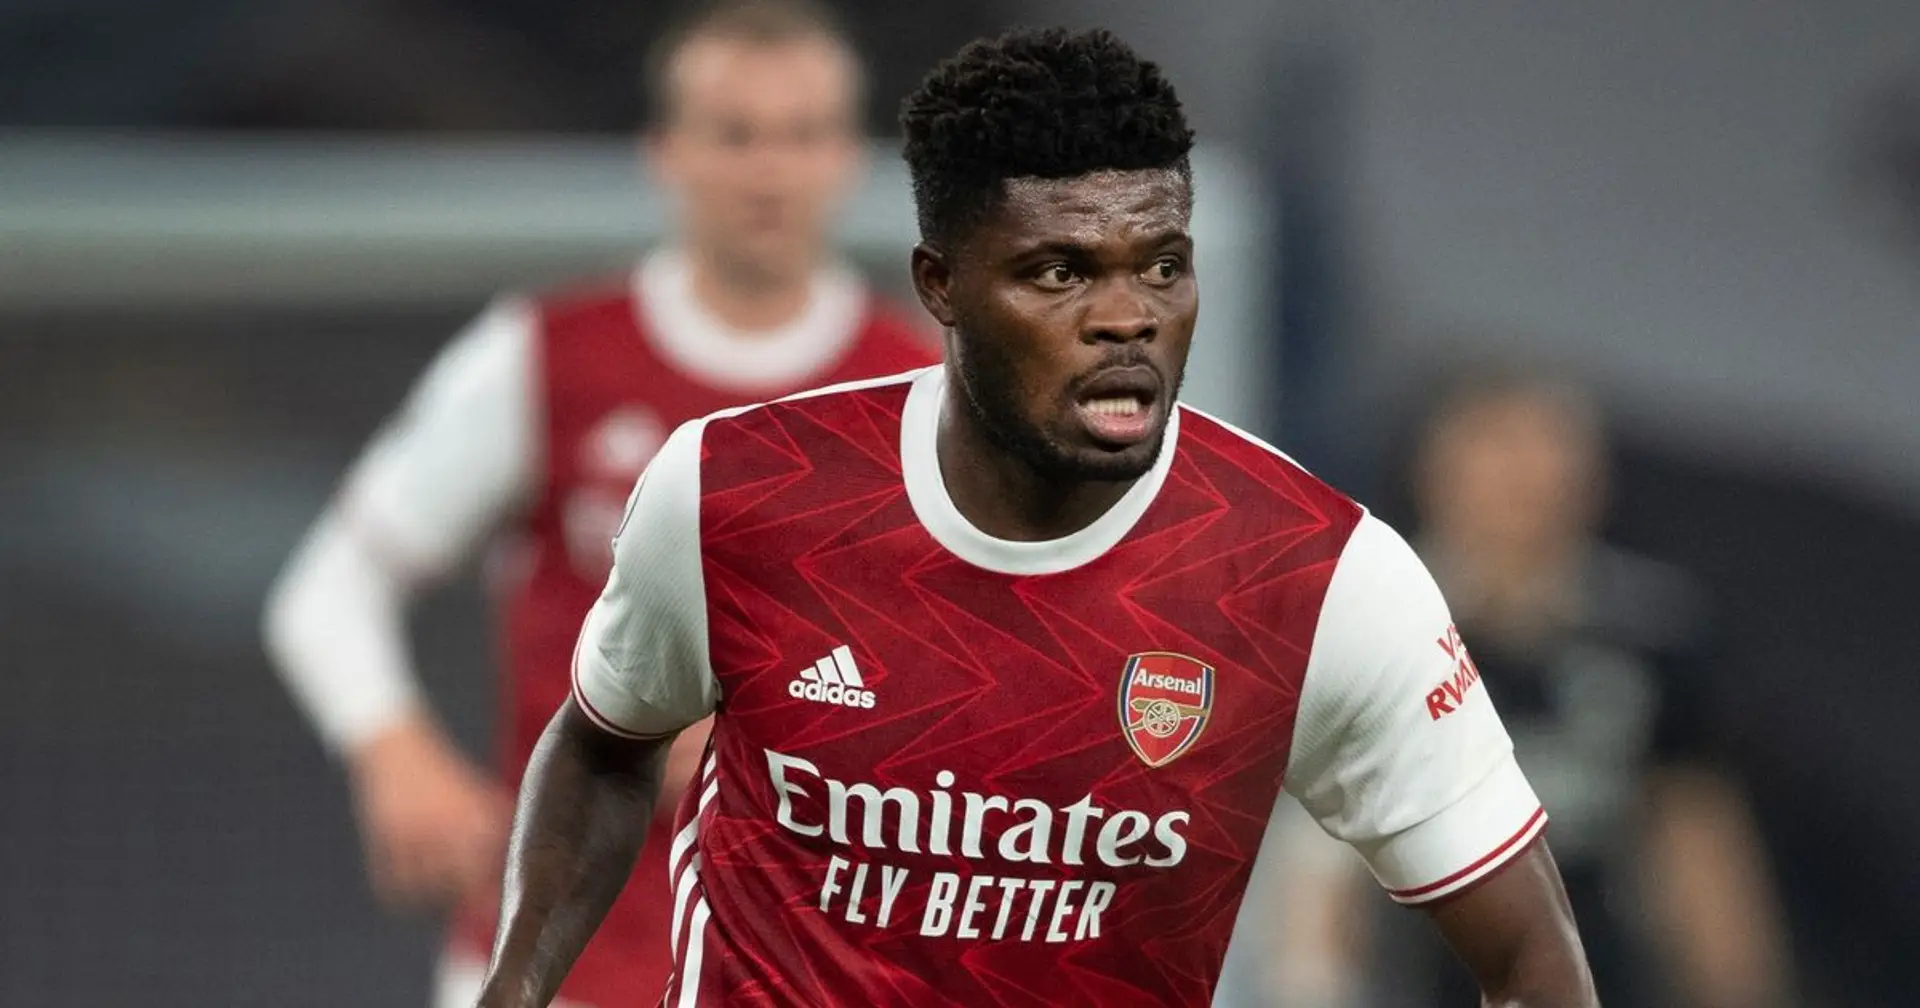 'I know we are building something good together': Thomas Partey sends strong message after getting recurrence of thigh injury